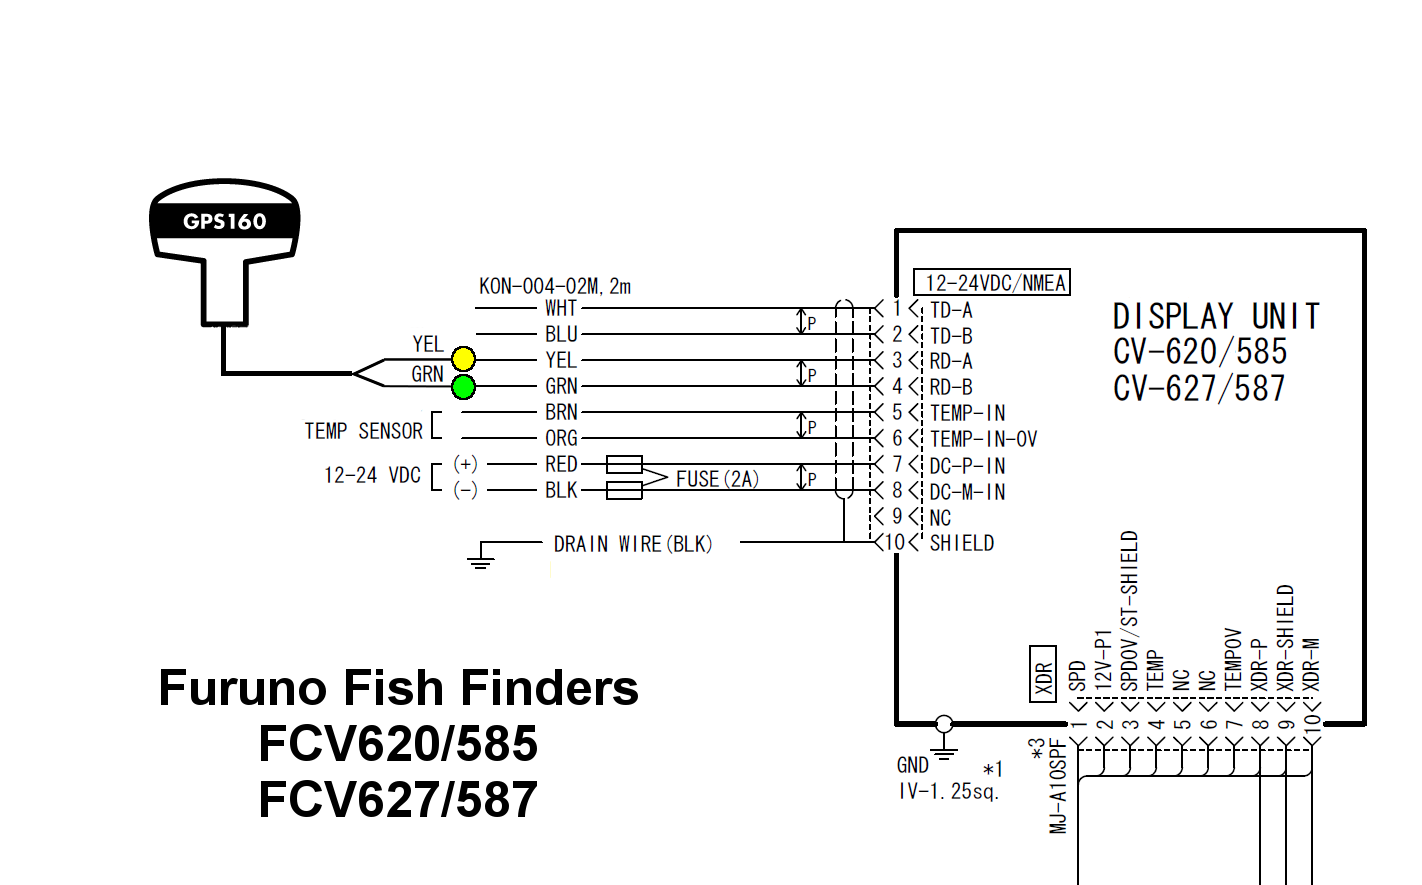 Interfacing a GPS160 to a Furuno FCV fish finders